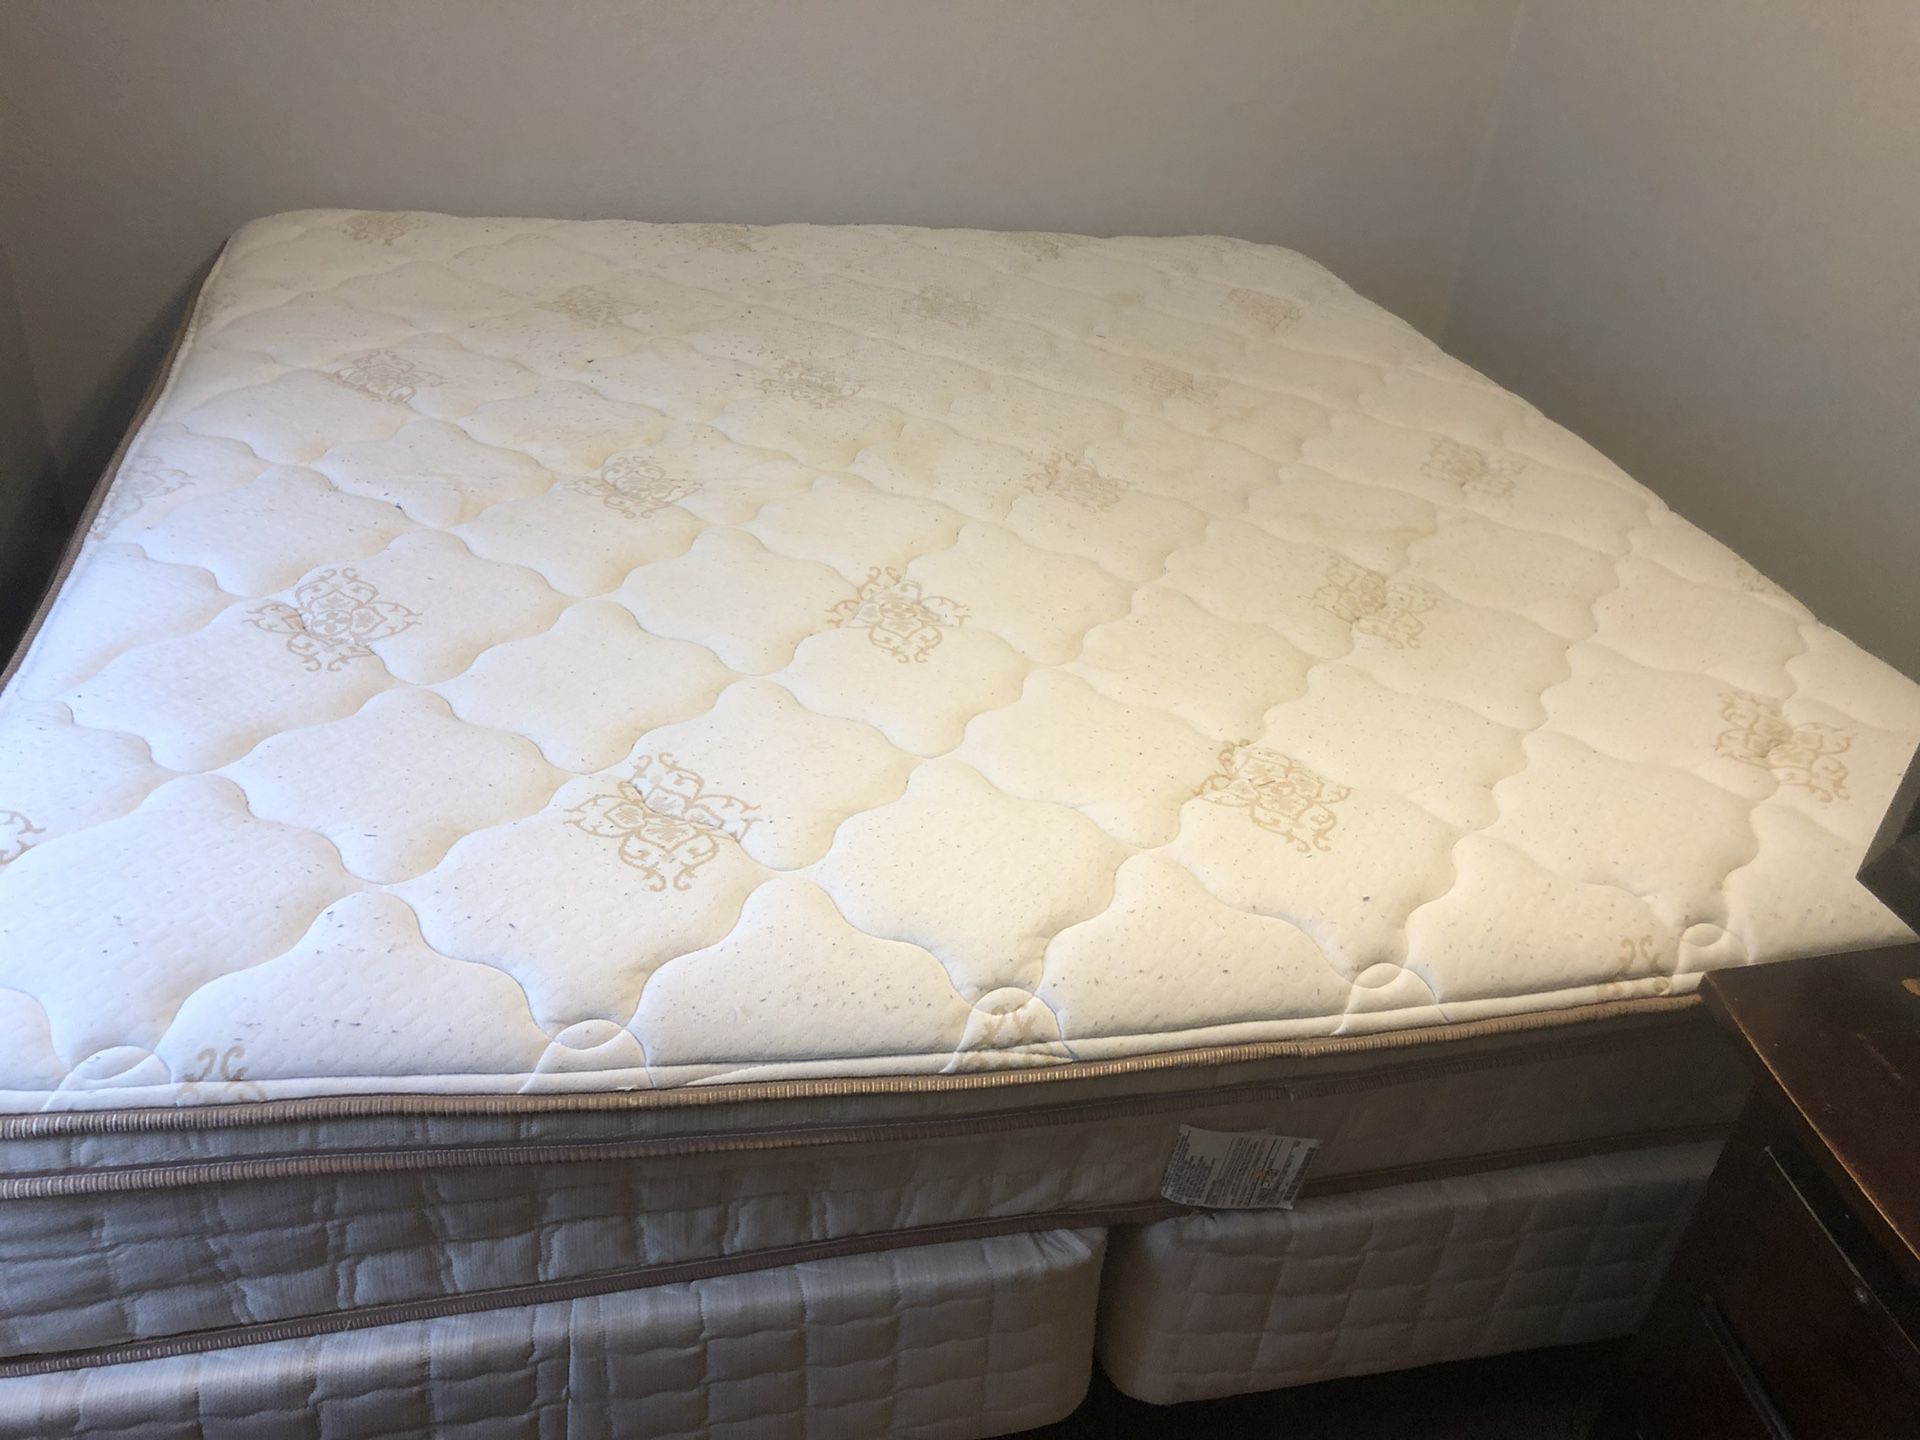 King sized matress with box spring.